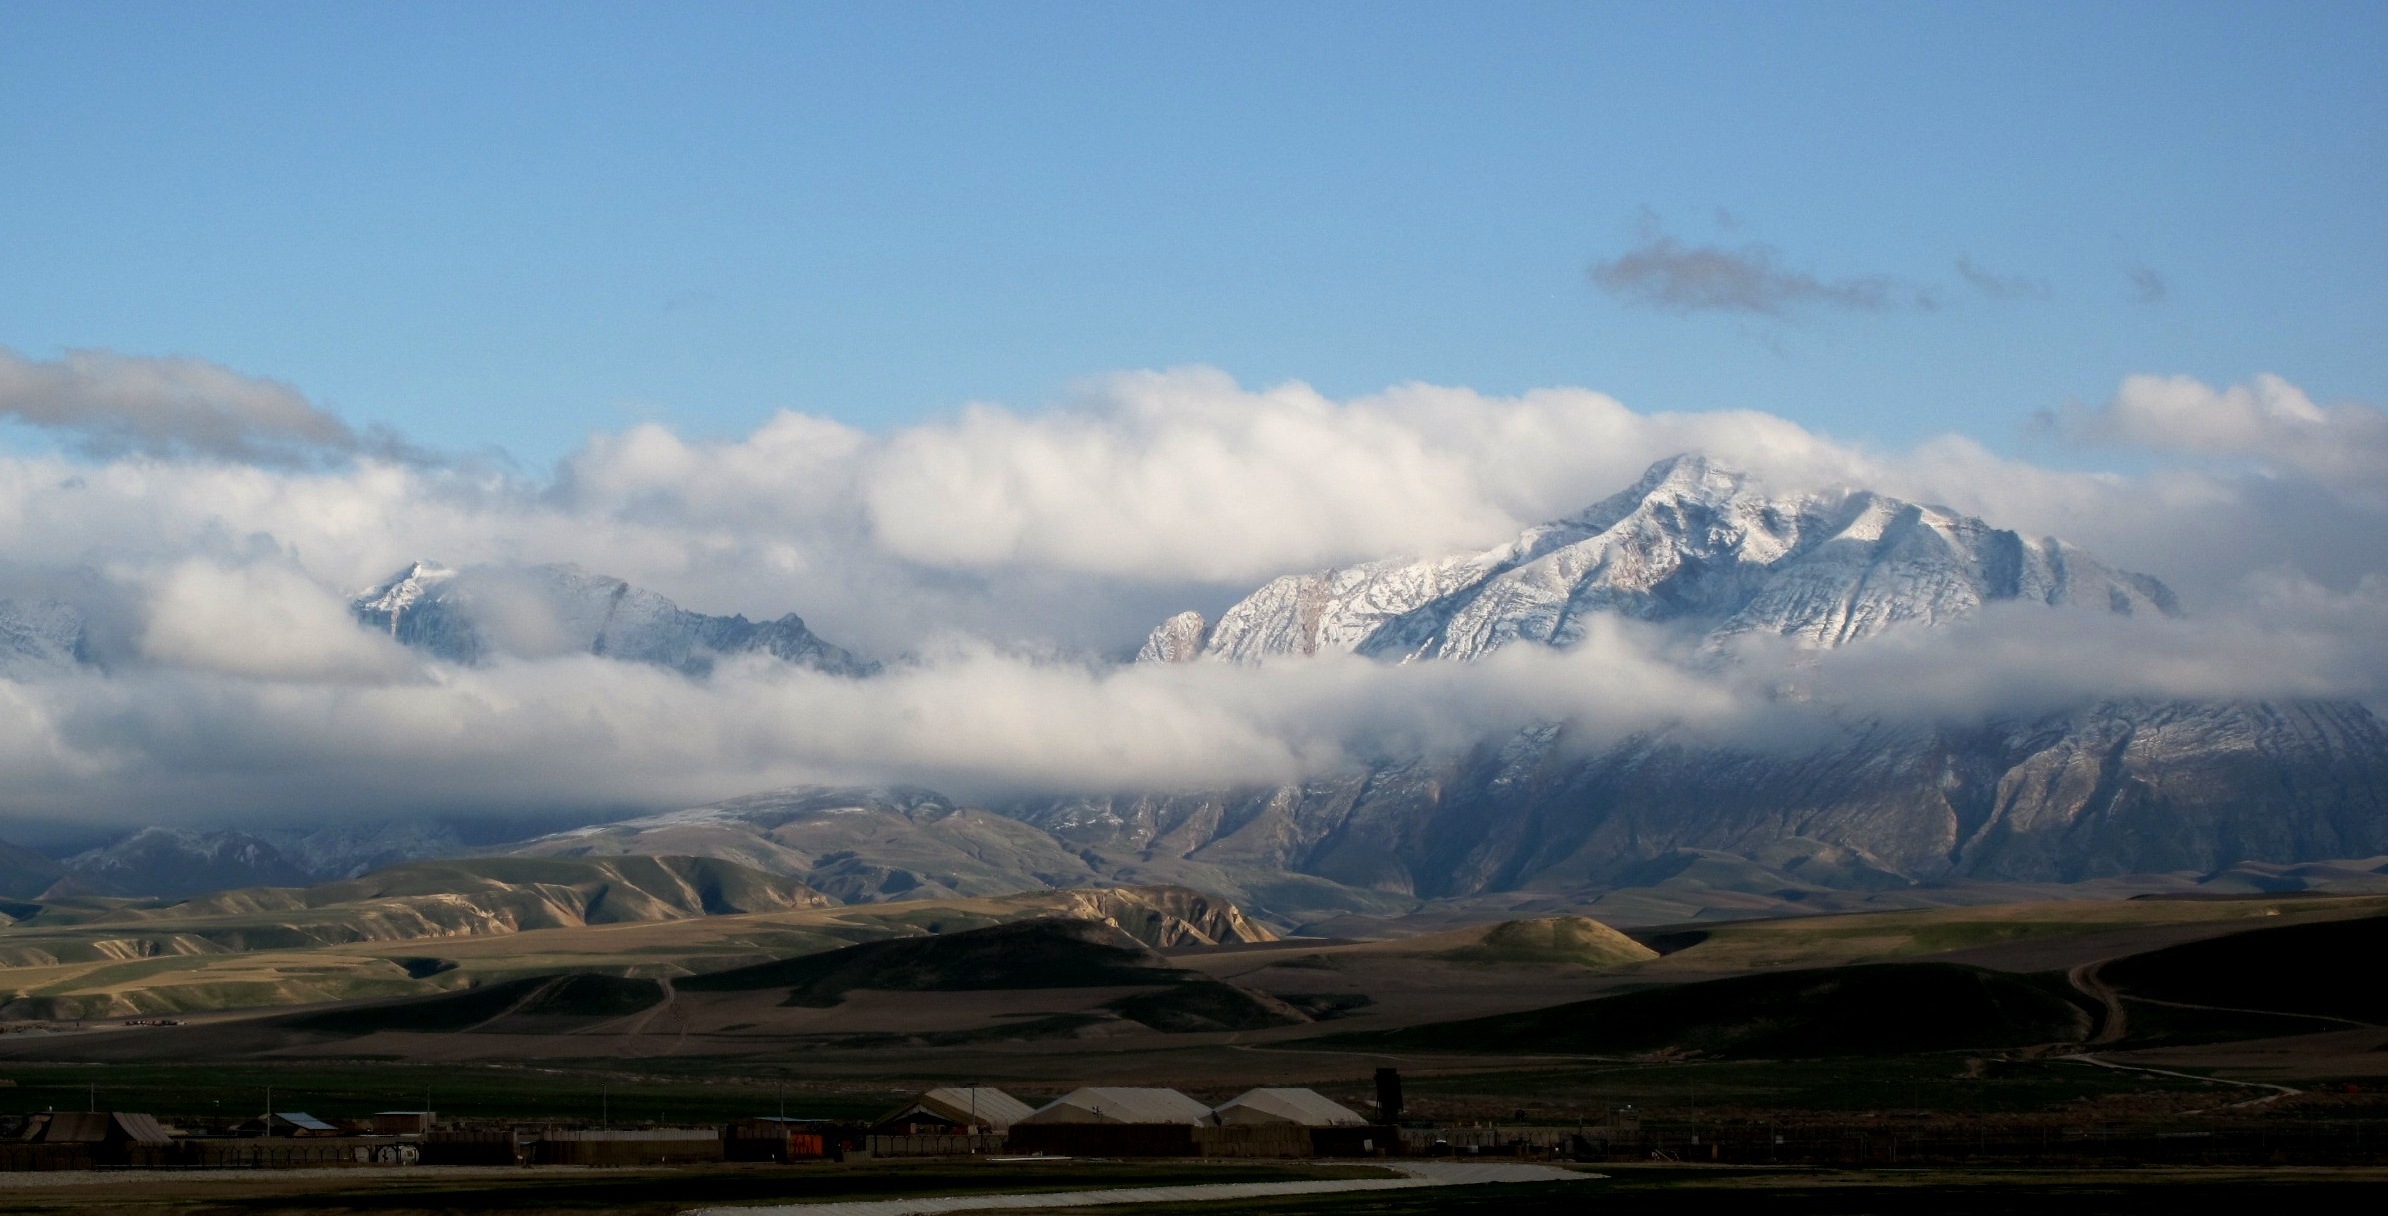 Marmal Mountains, Afghanistan - March 2013